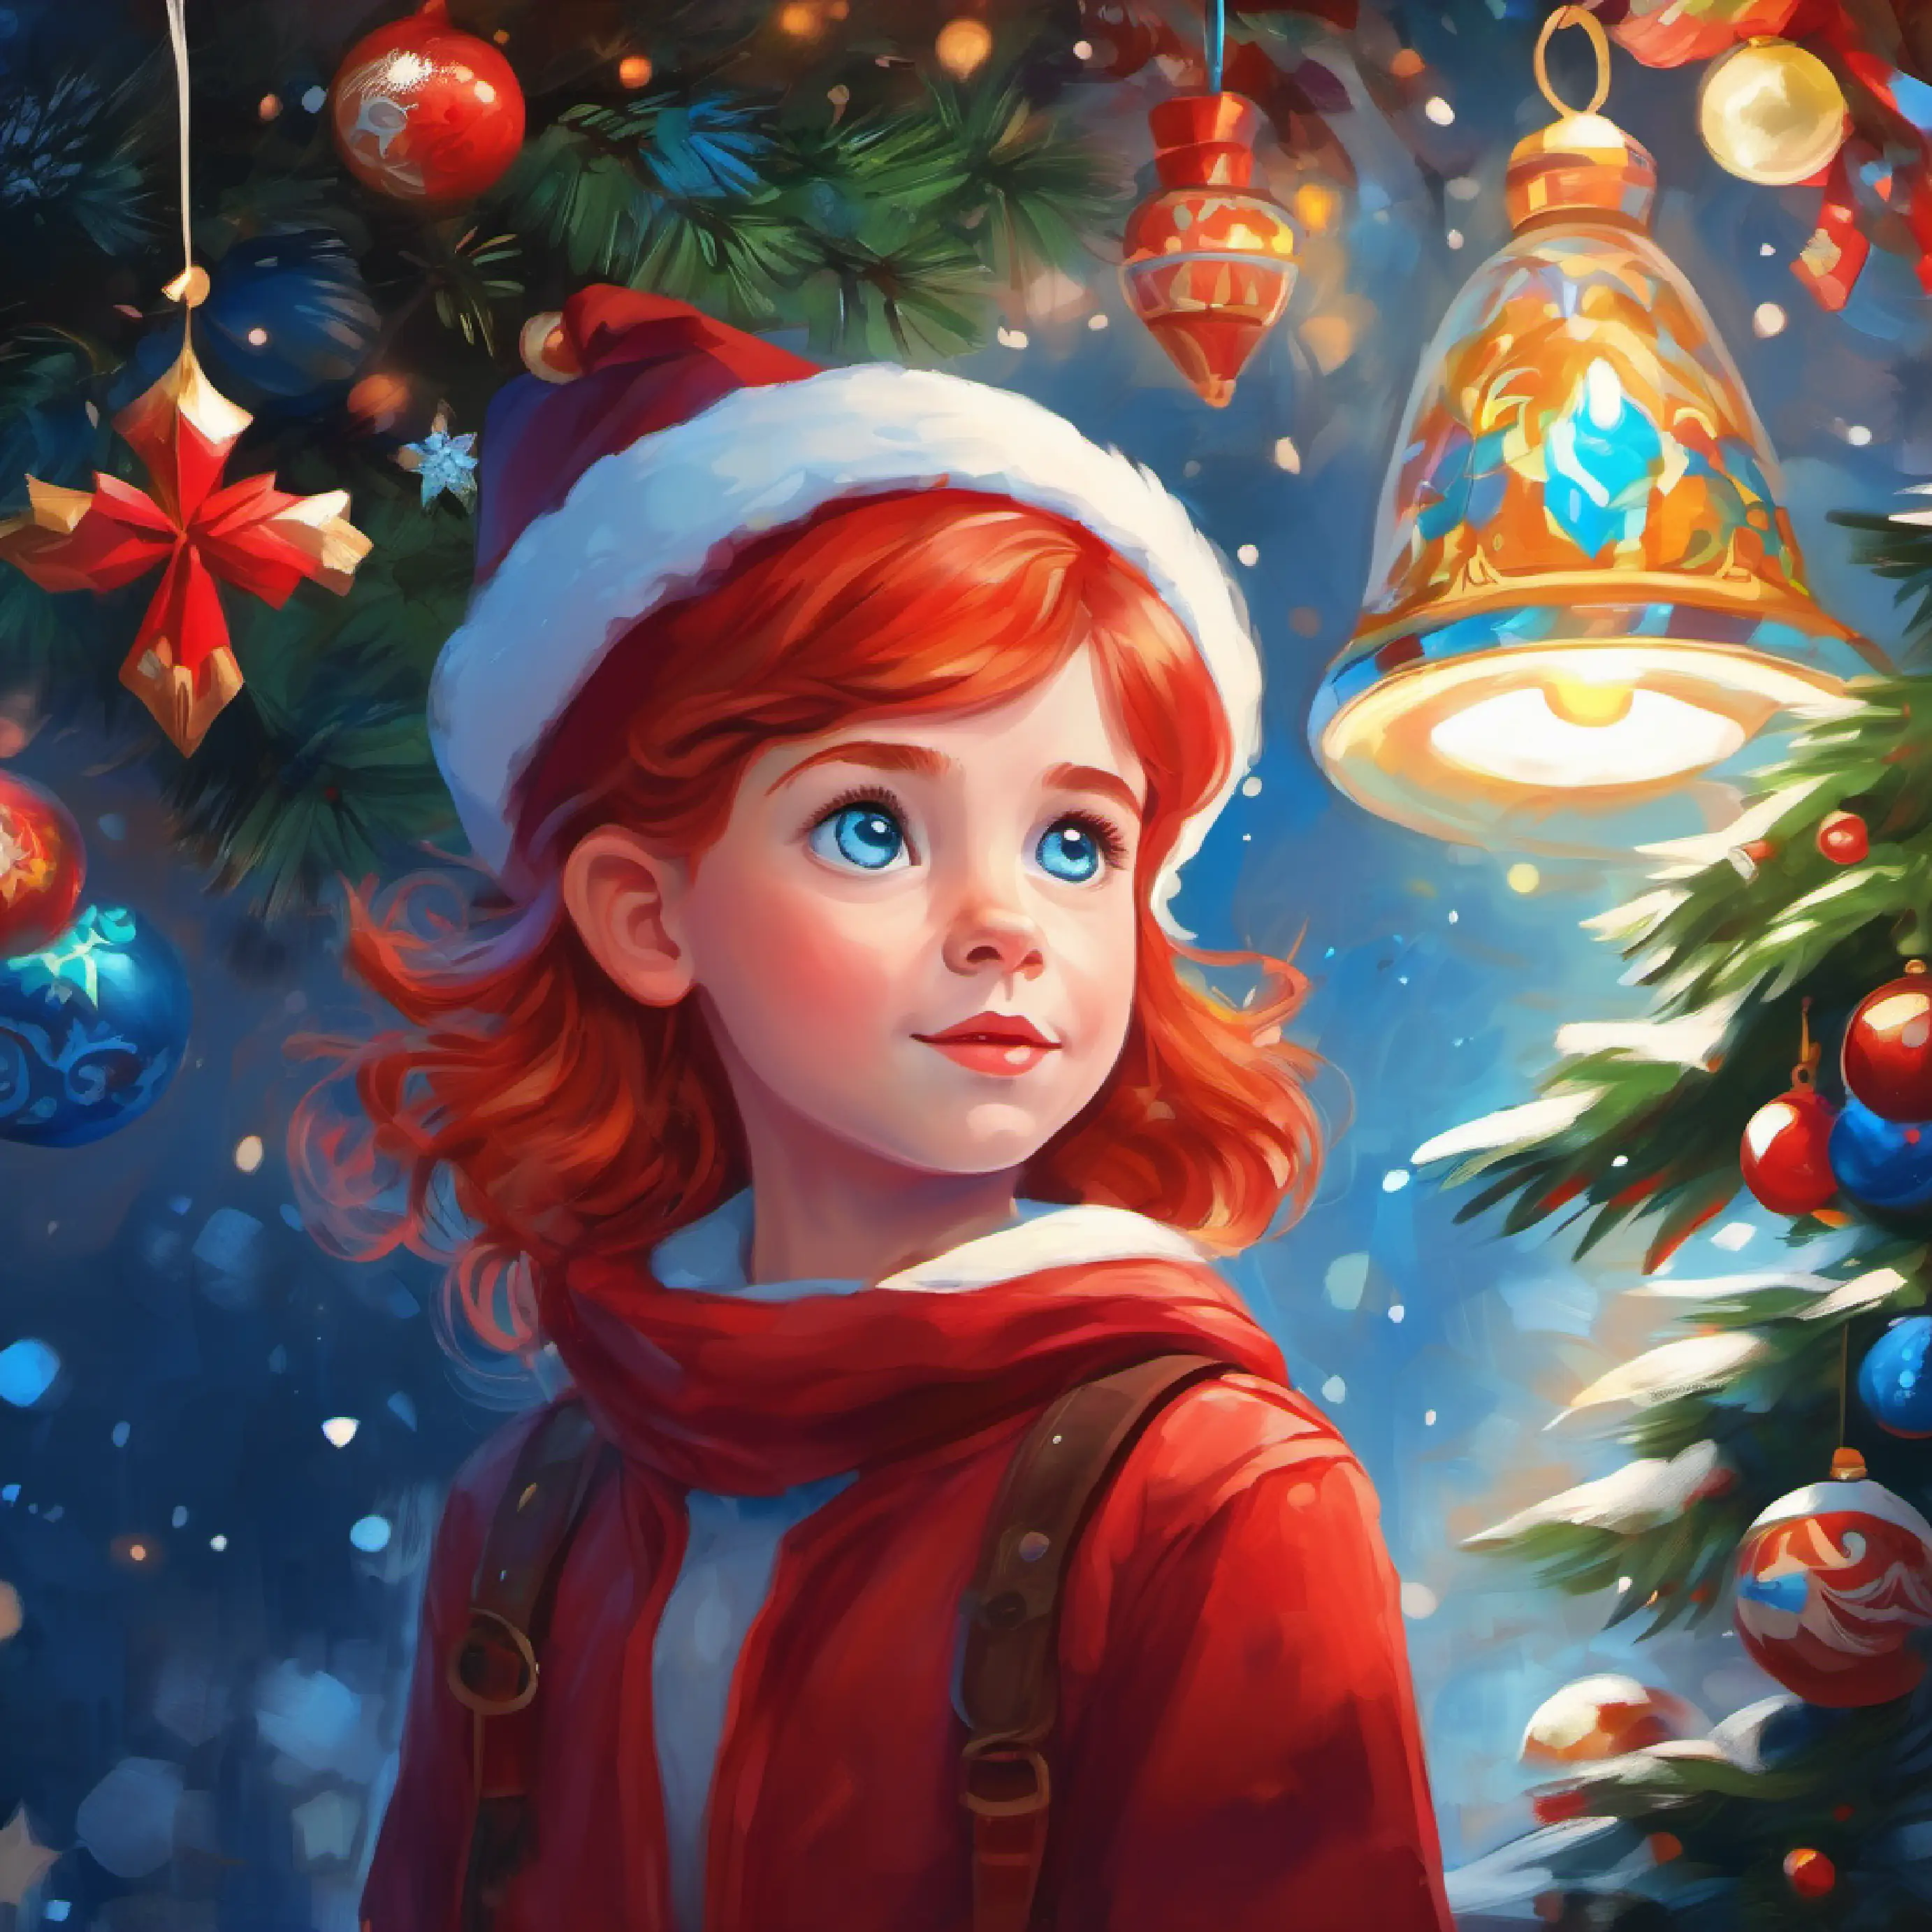 Curious young girl, bright blue eyes, red hair, inquisitive's imagination goes wild, and Duncan clarifies.